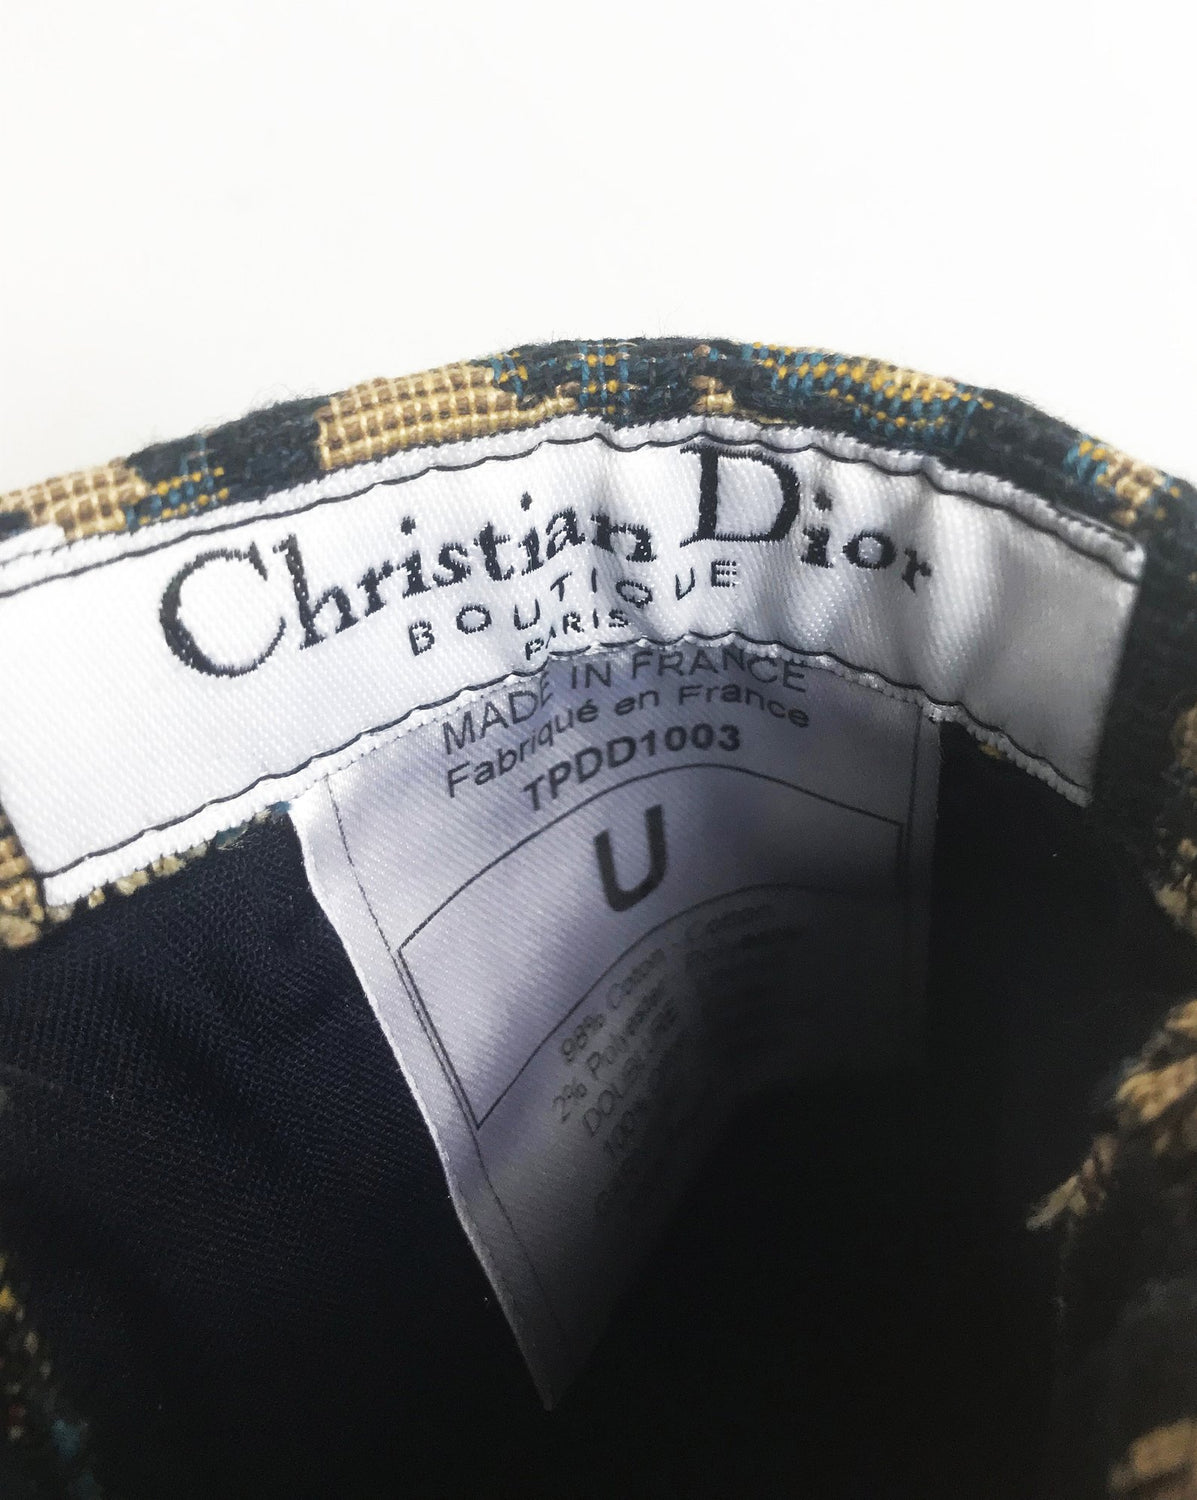 FRUIT vintage Christian Dior navy monogram logo eye mask and case set in mint/unused condition, dating to the 1980s. Features the classic Christian Dior trotter/oblique print all over and satin trim.